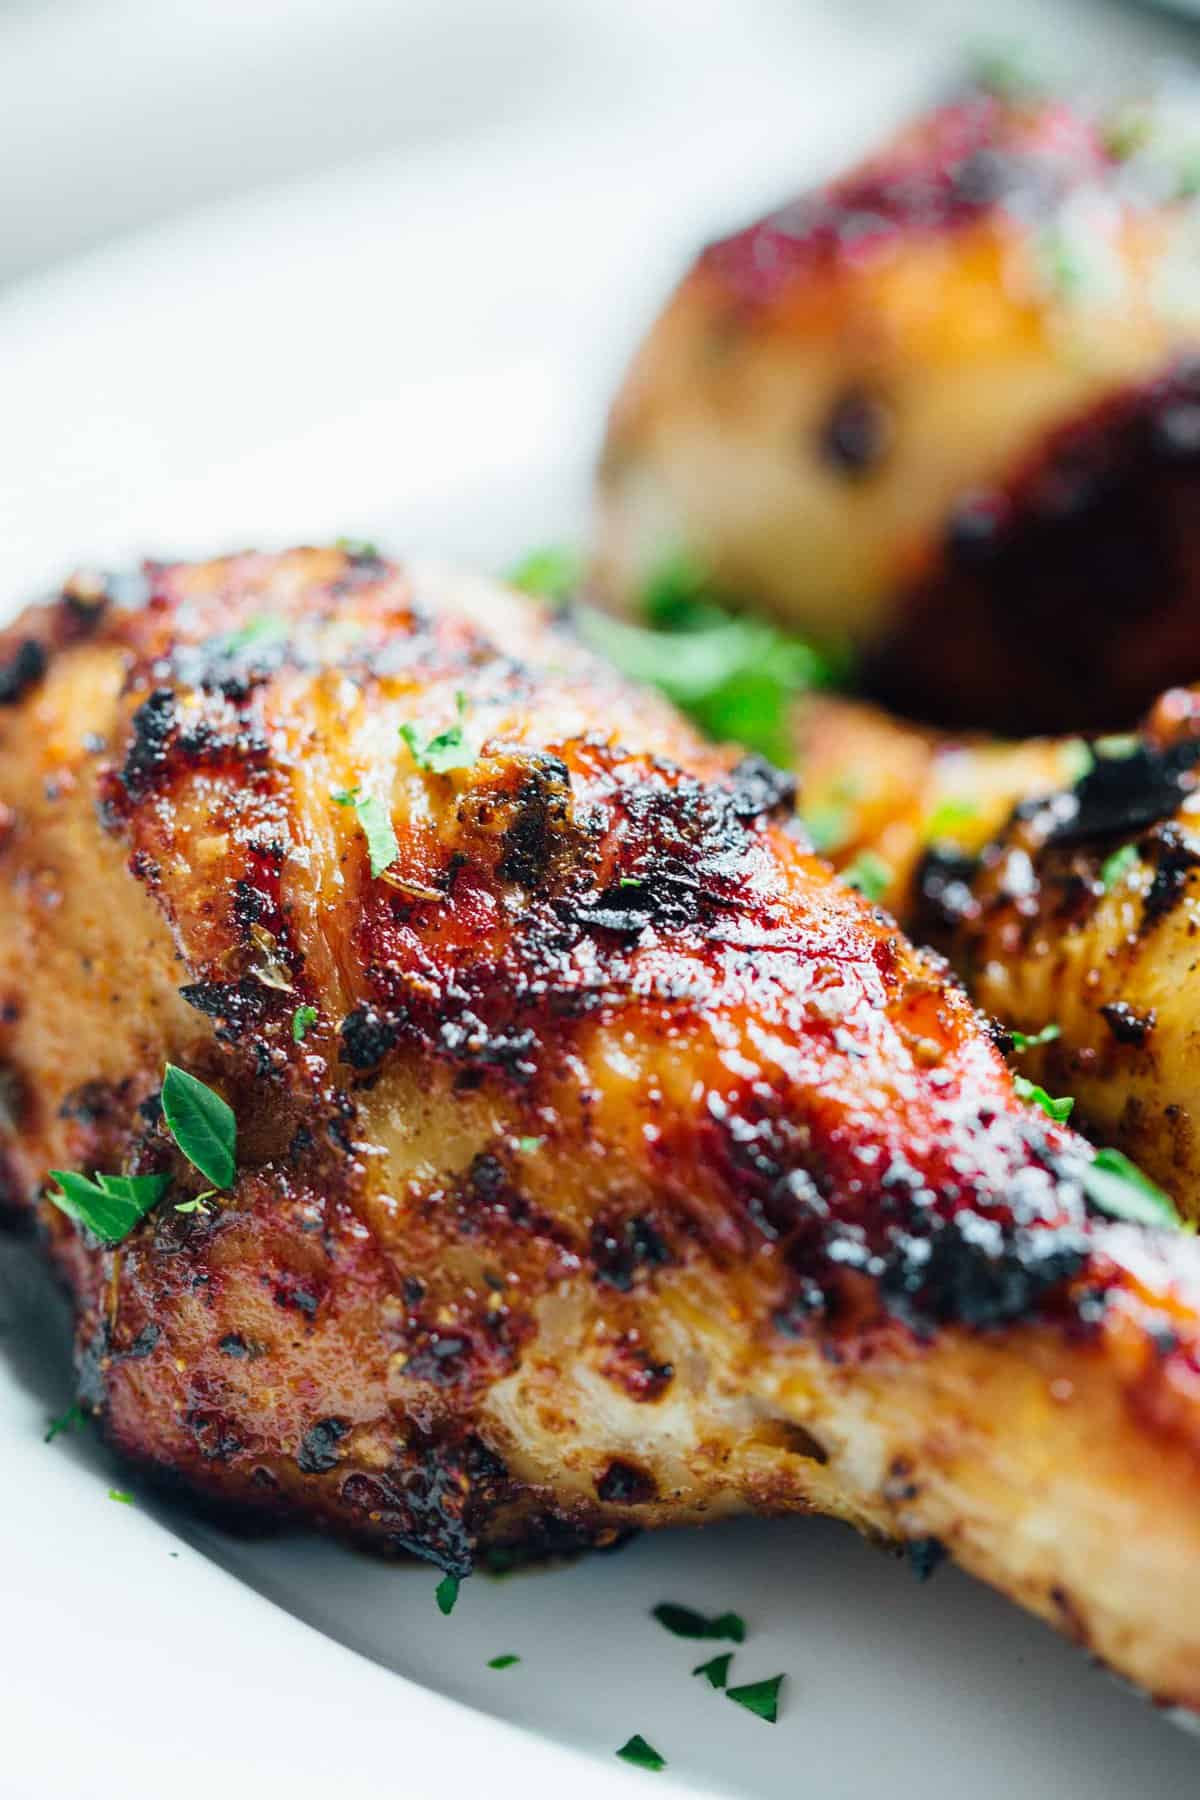 Grilled peri peri chicken drumsticks are the perfect addition to your summer grilling menu! They're easy to prepare and they are packed with flavor! #chicken #chickendinner #svorganic #periperi #drumsticks #chickenrecipes #grilling #grilledchicken #grillrecipes